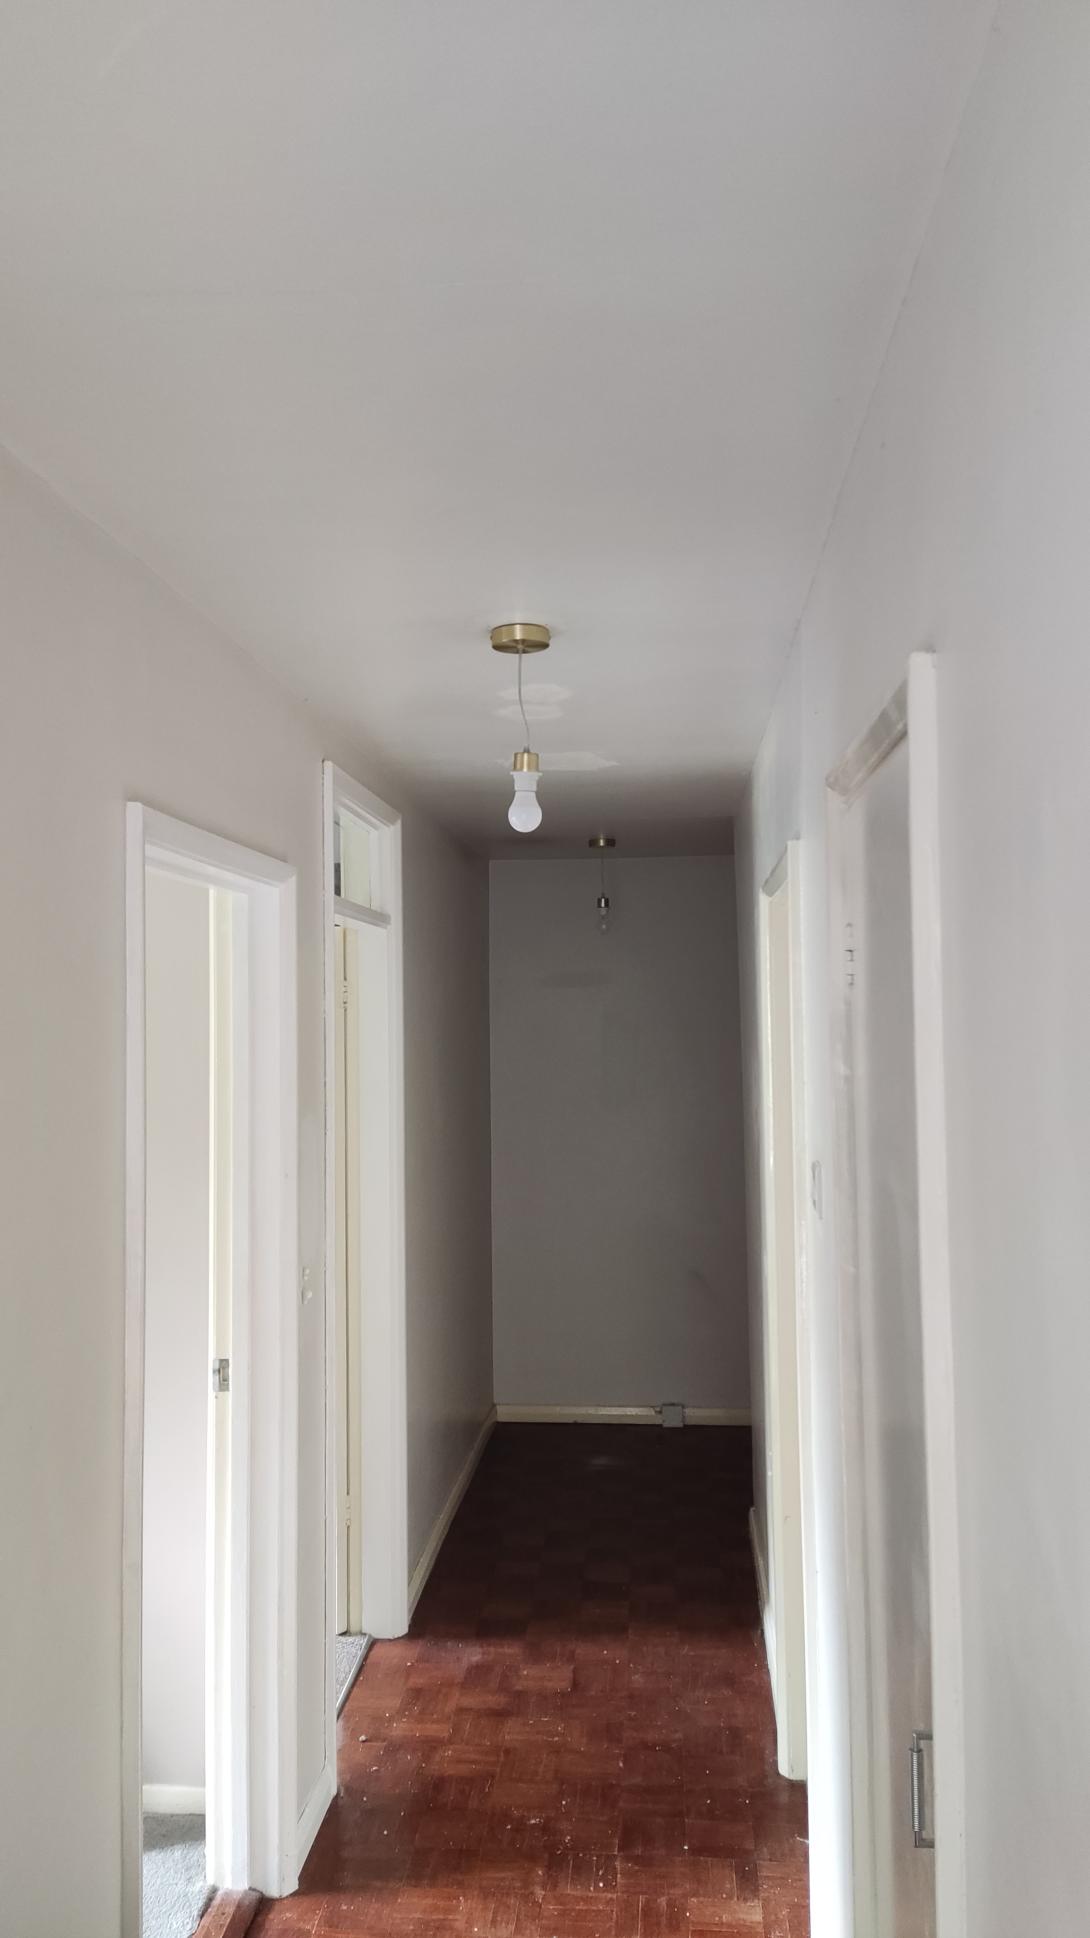 I need electrician for ceiling light replacement 